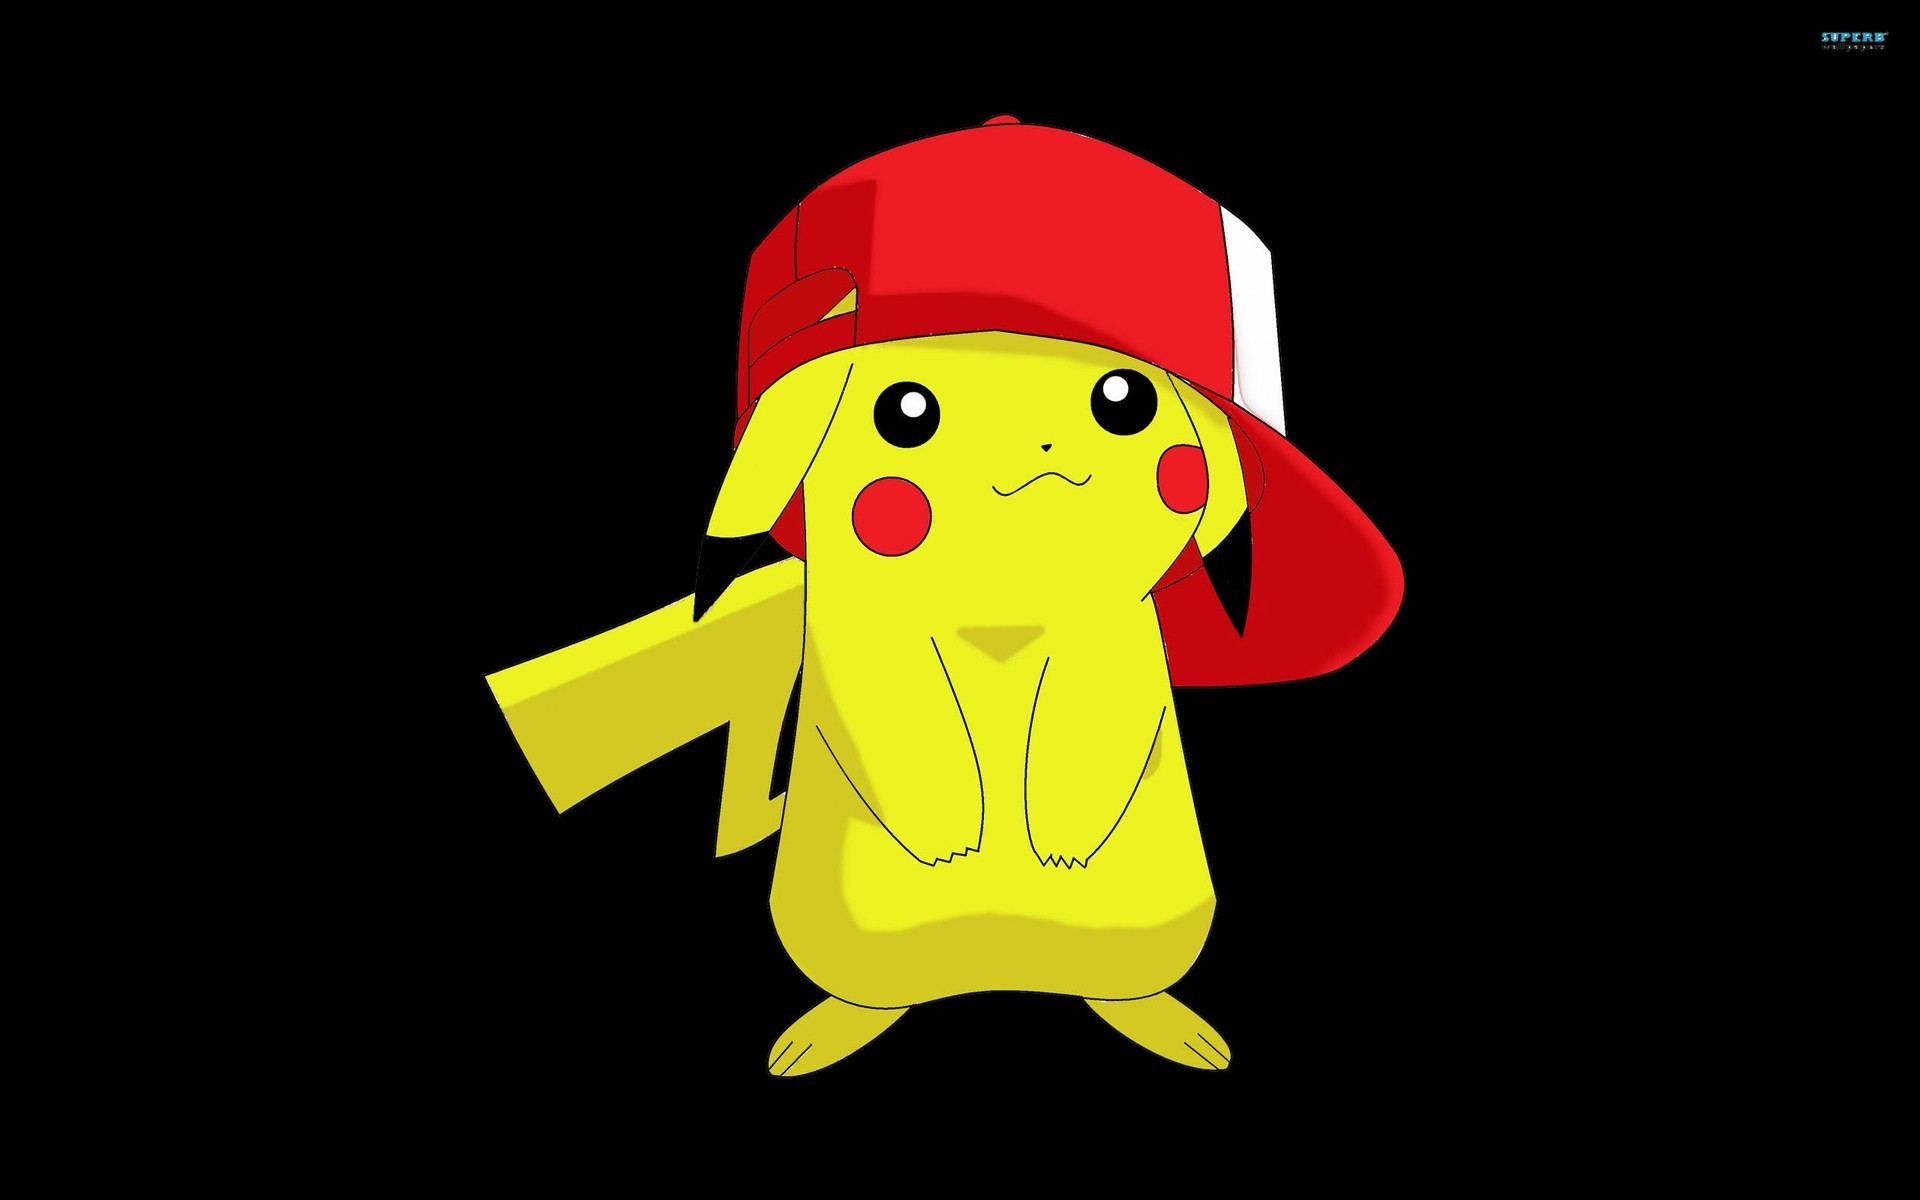 1920x1200 ... Perfect Cool Pokemon S Wallpaper of awesome full screen HD wallpapers  to download for free.